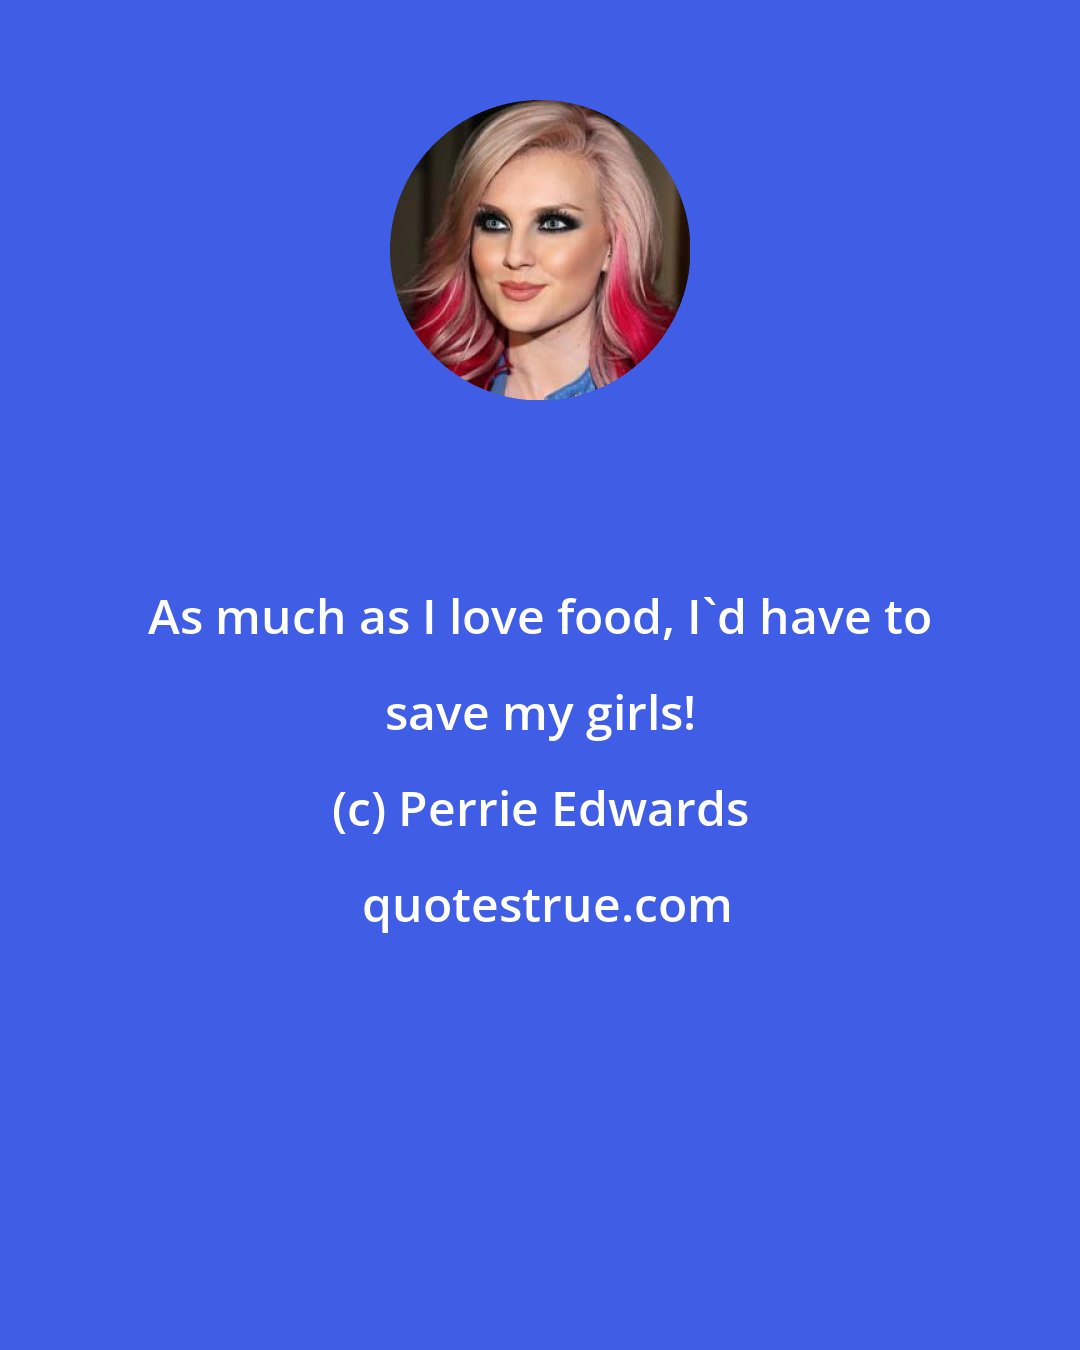 Perrie Edwards: As much as I love food, I'd have to save my girls!